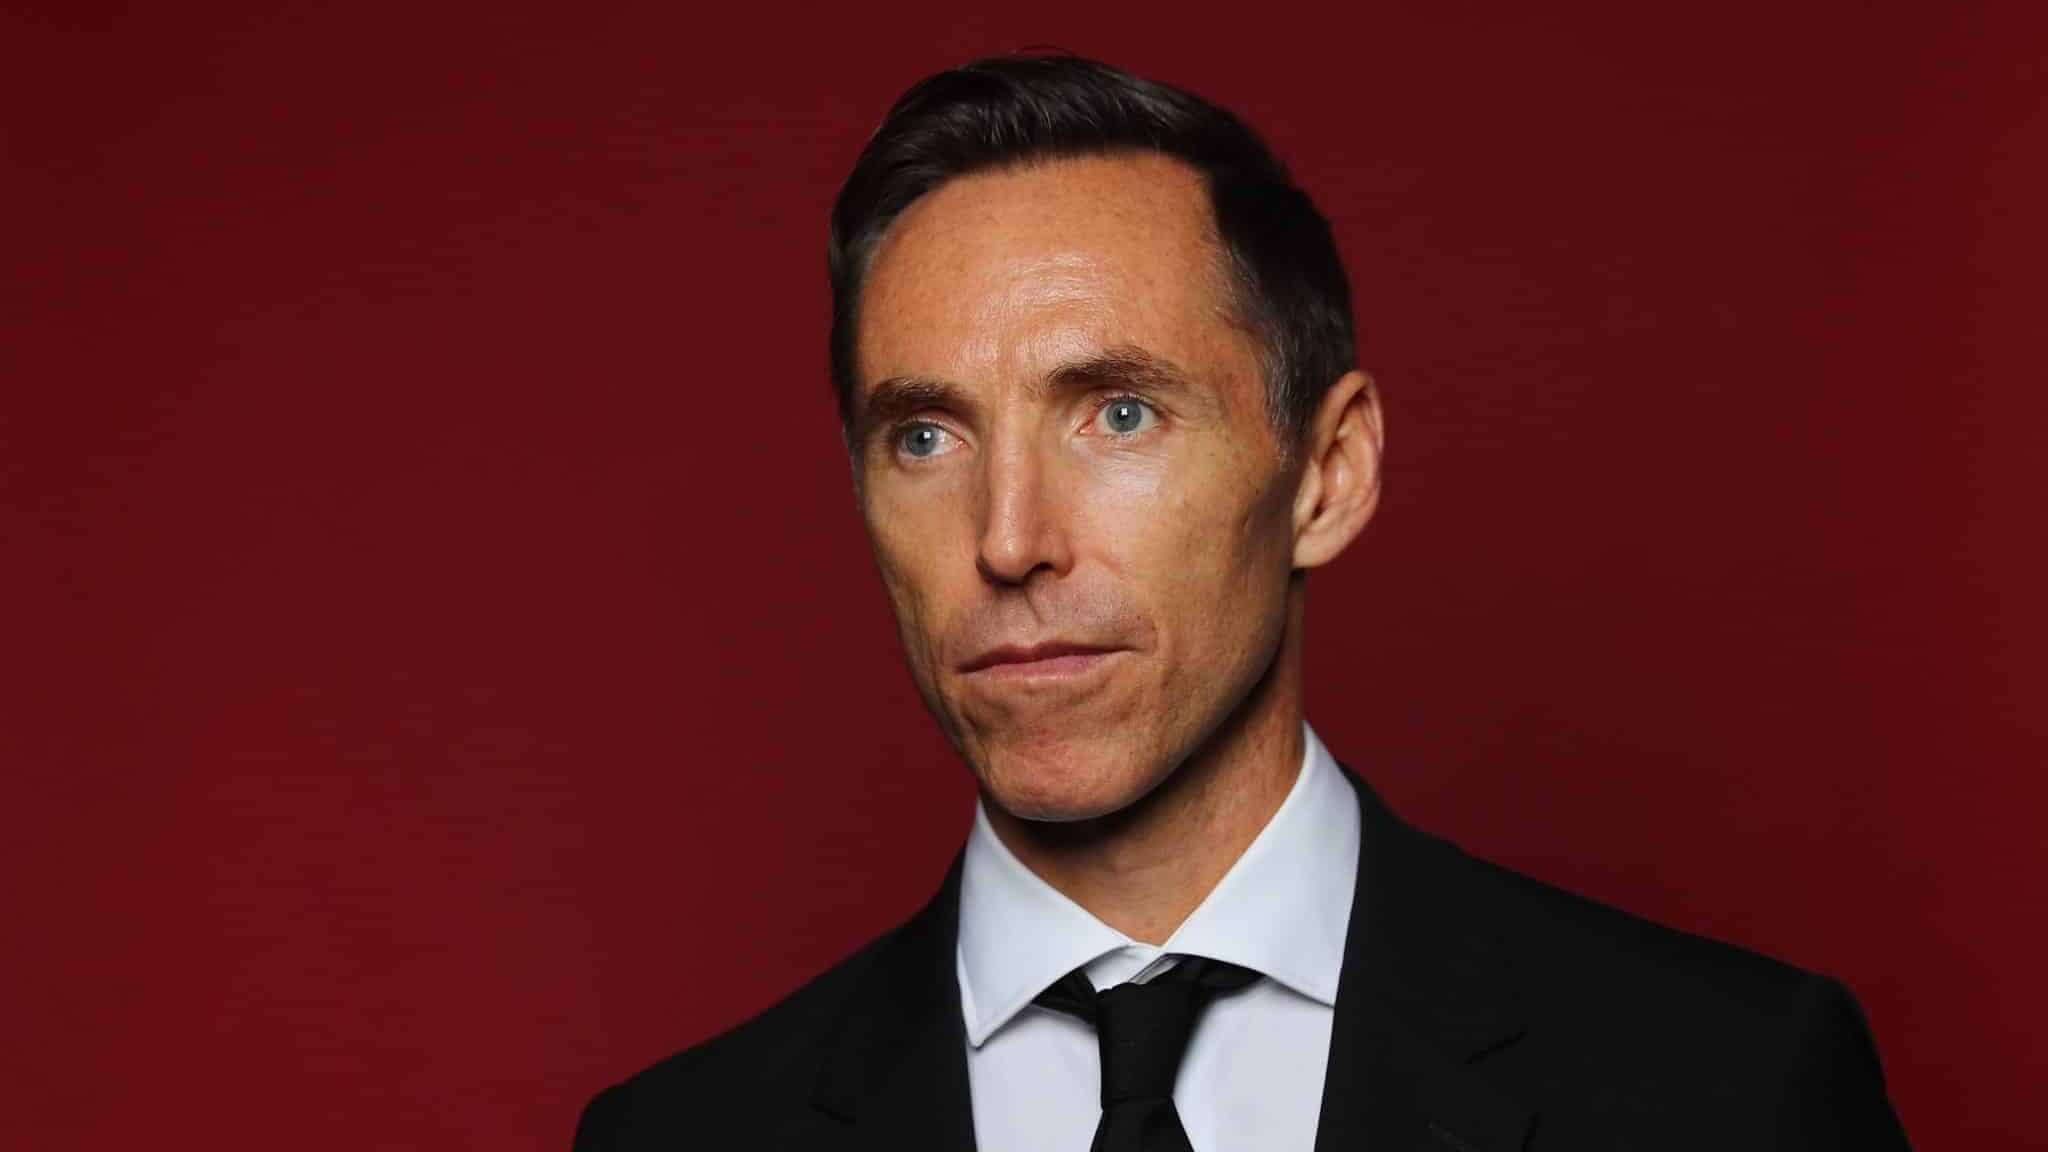 SPRINGFIELD, MA - SEPTEMBER 07: Steve Nash poses for a portrait at the Naismith Memorial Basketball Hall of Fame on September 7, 2018 in Springfield, Massachusetts.